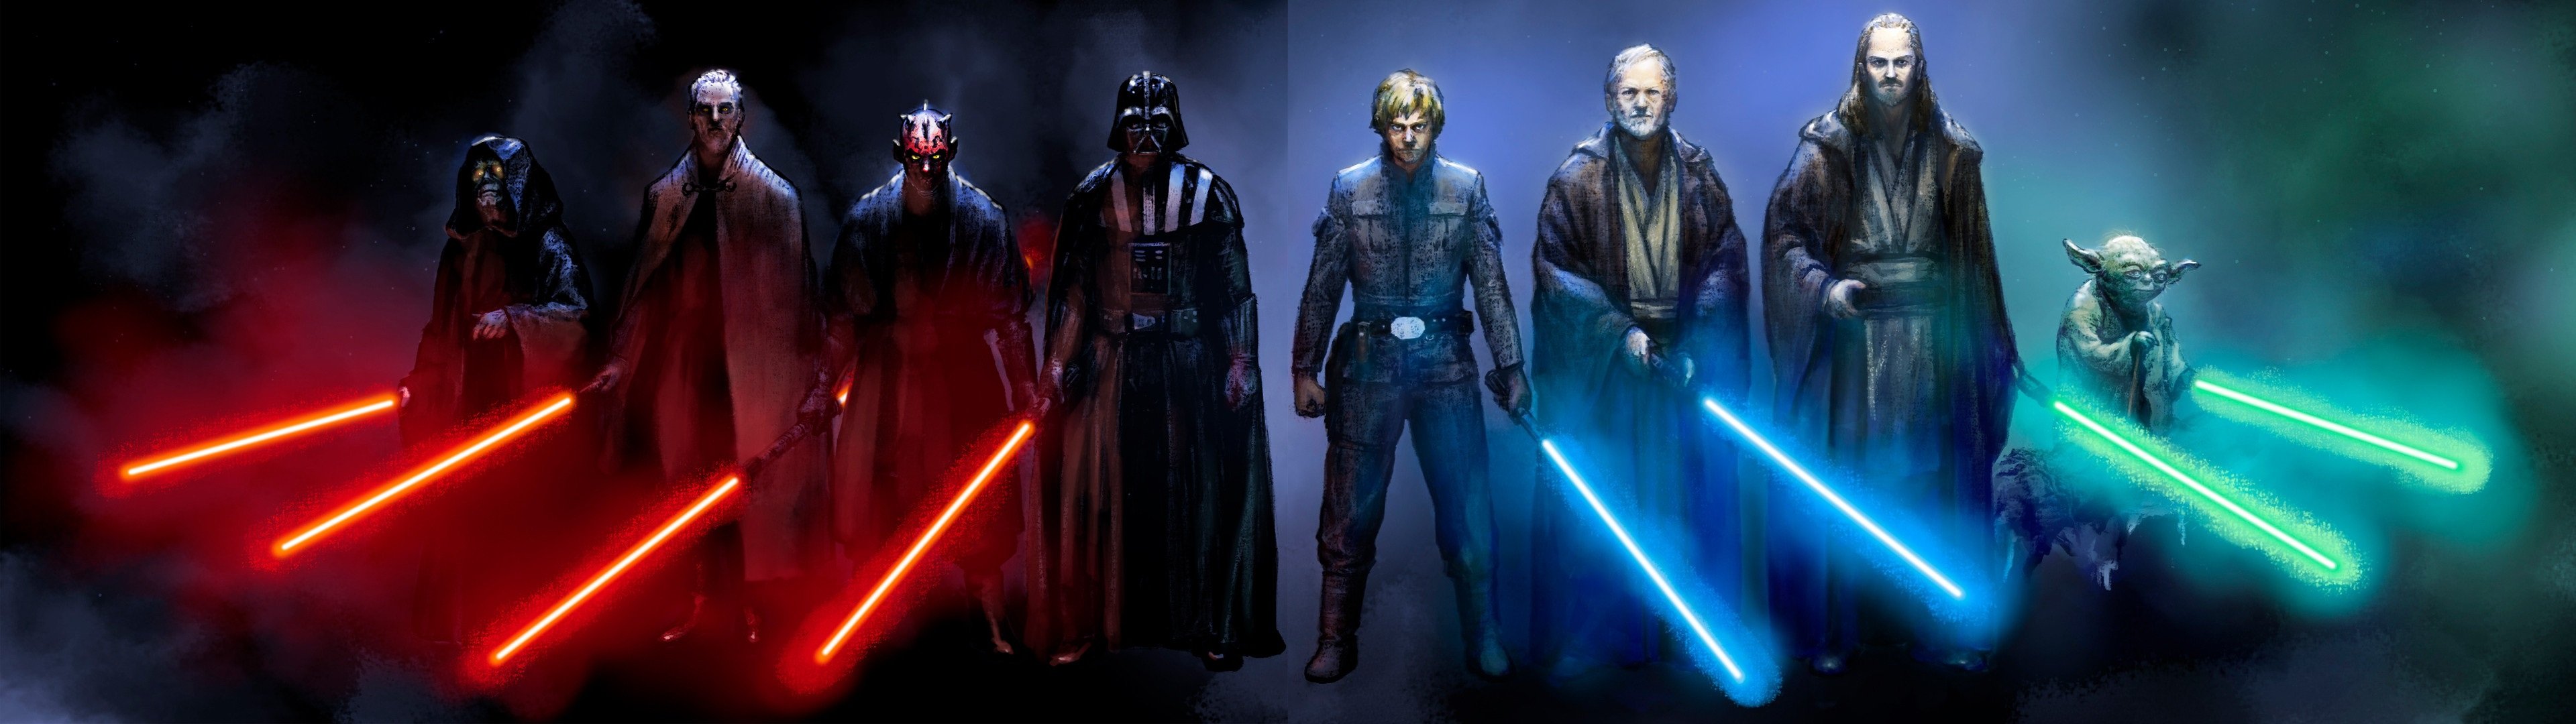 Jedi 4k Wallpapers For Your Desktop Or Mobile Screen Free And Easy To Download